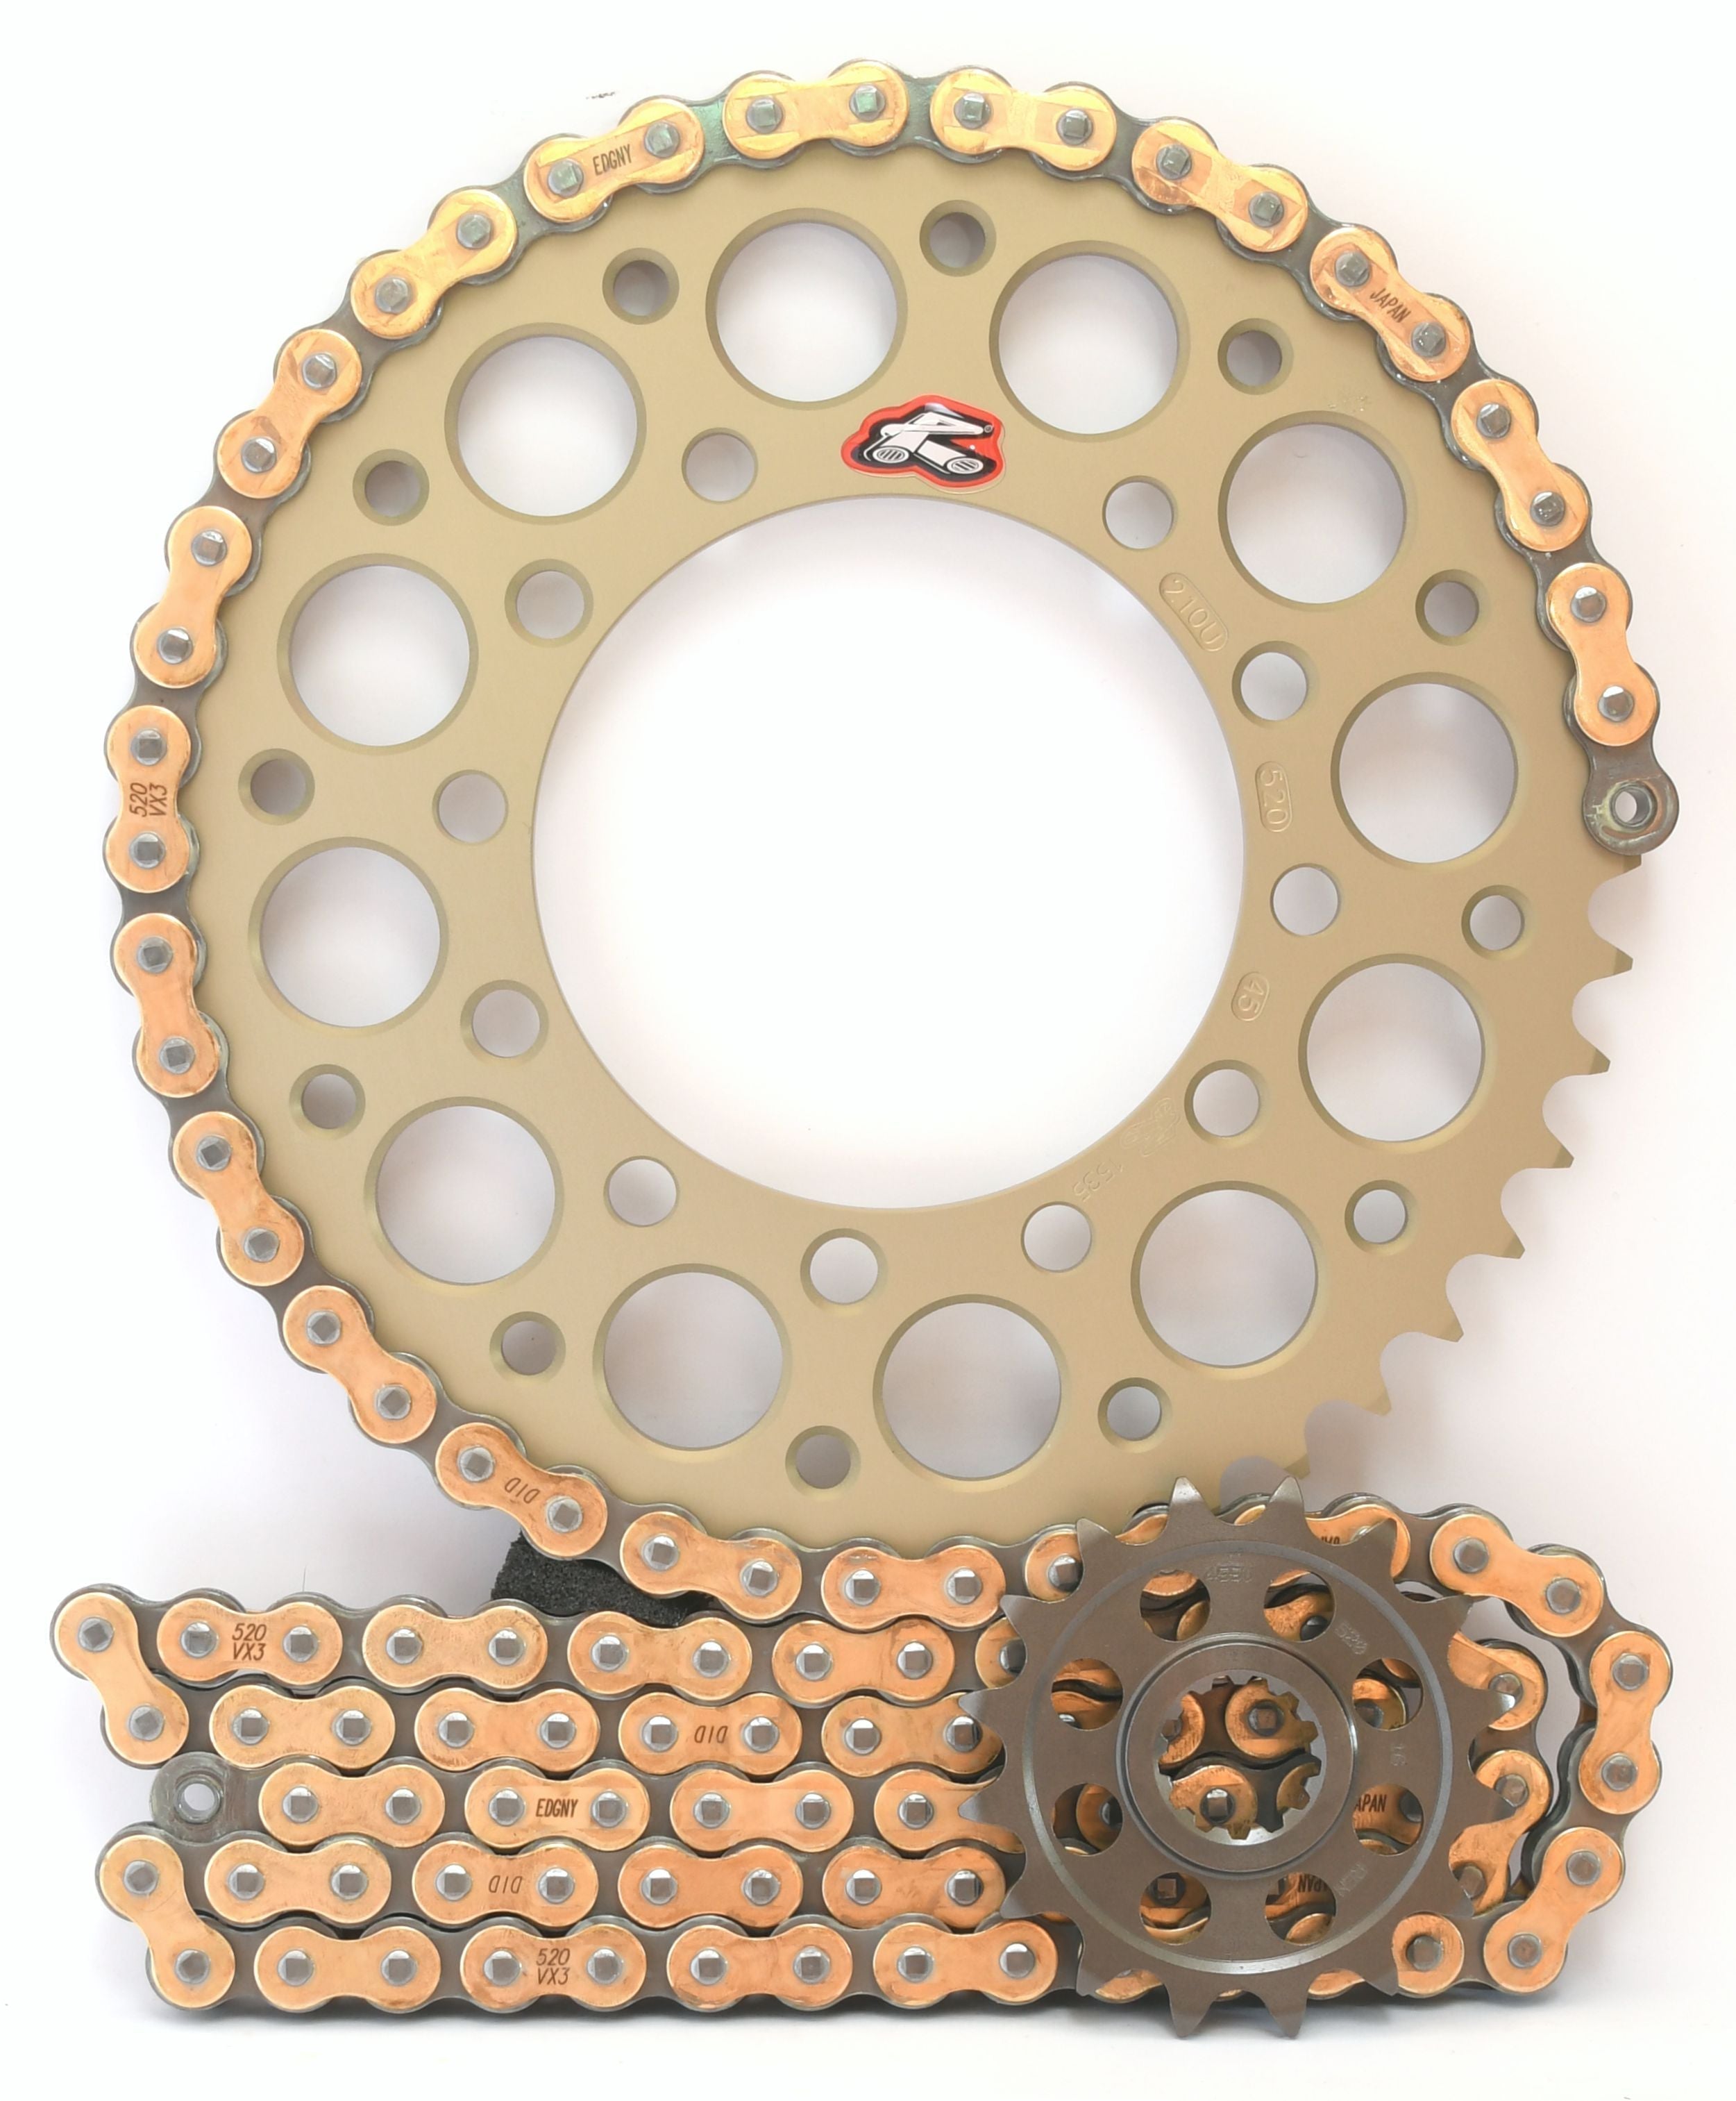 Renthal Ultralight and DID Chain & Sprocket Kit 520 Conversion for GSX-R600 2004-2005 - Standard Gearing